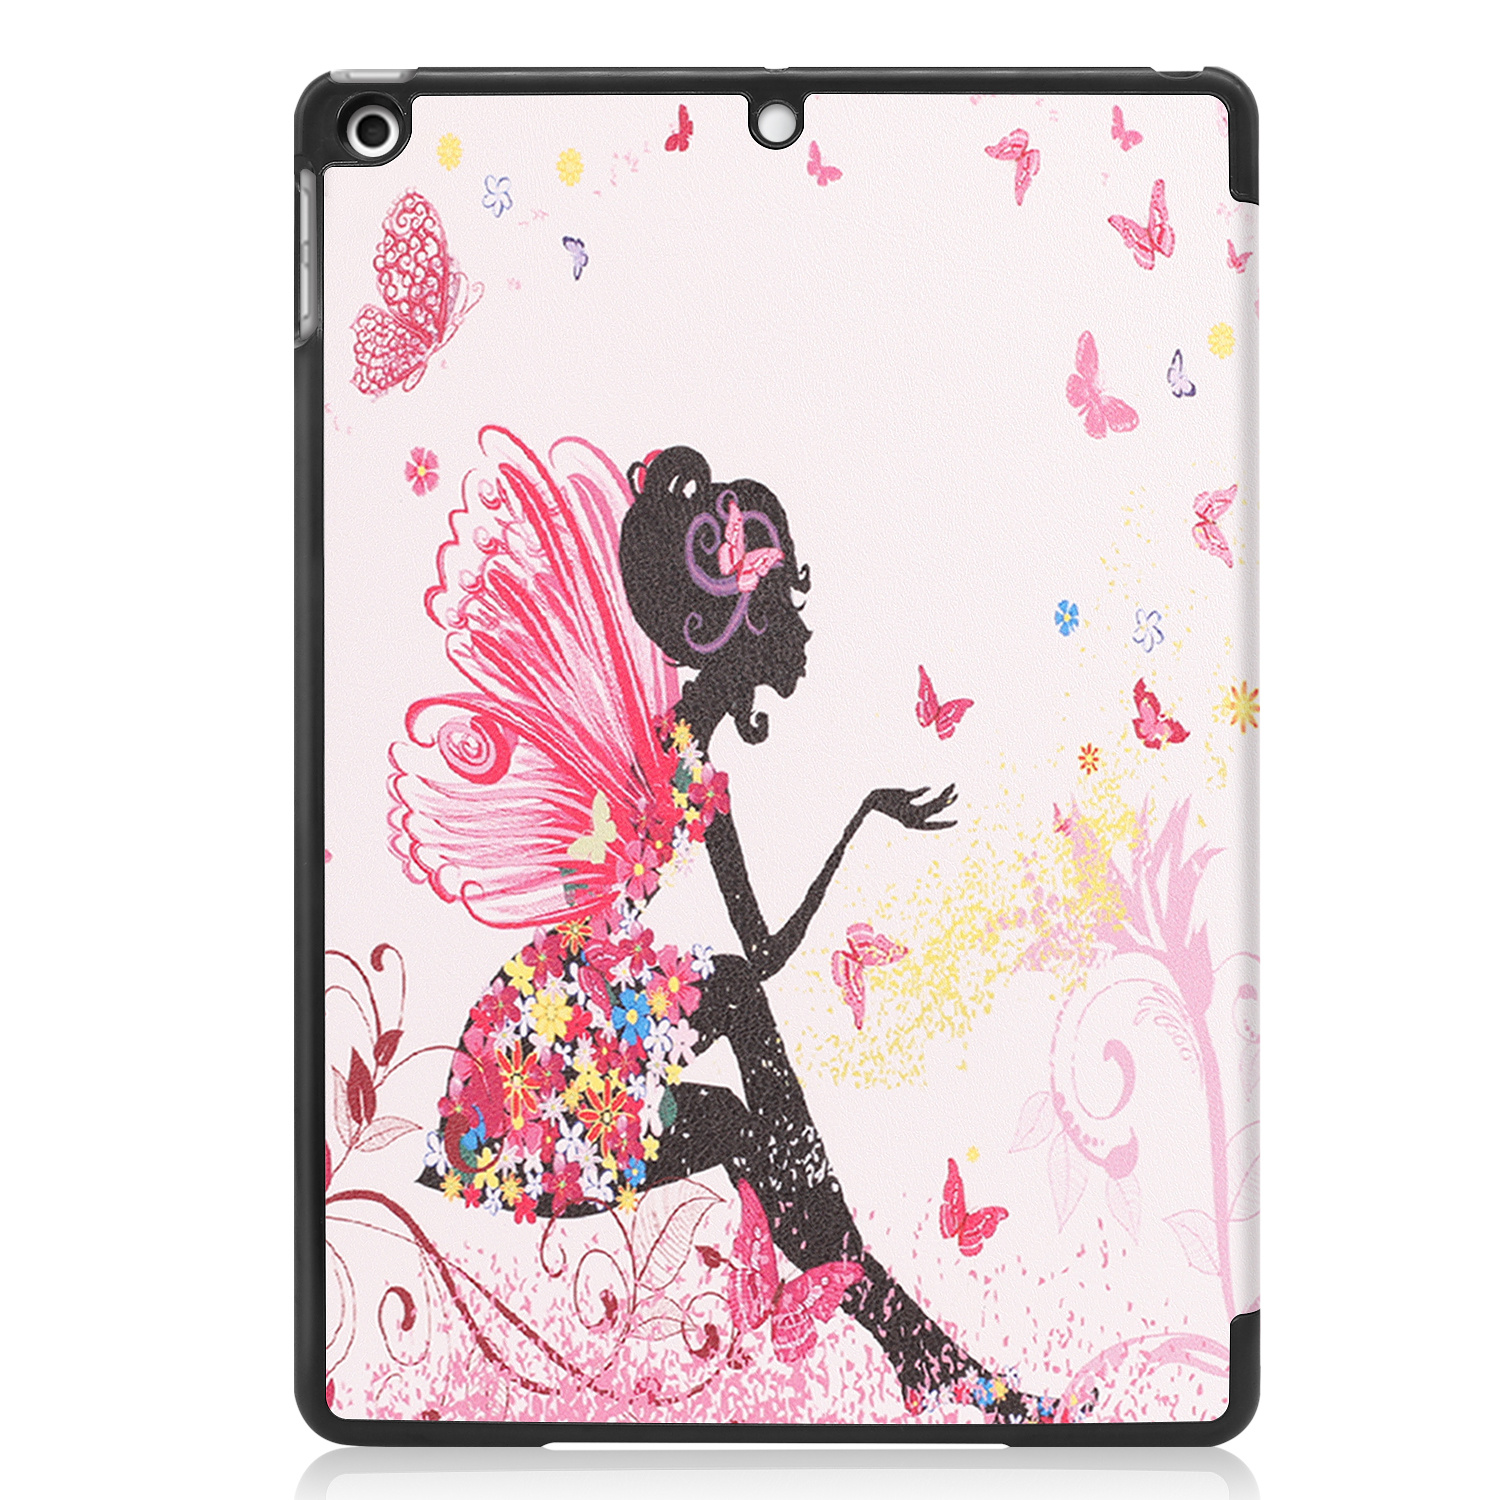 Nomfy iPad 10.2 2020 Hoesje Book Case Hoes - iPad 10.2 2020 Hoes Hardcover Case Hoesje - Elfje